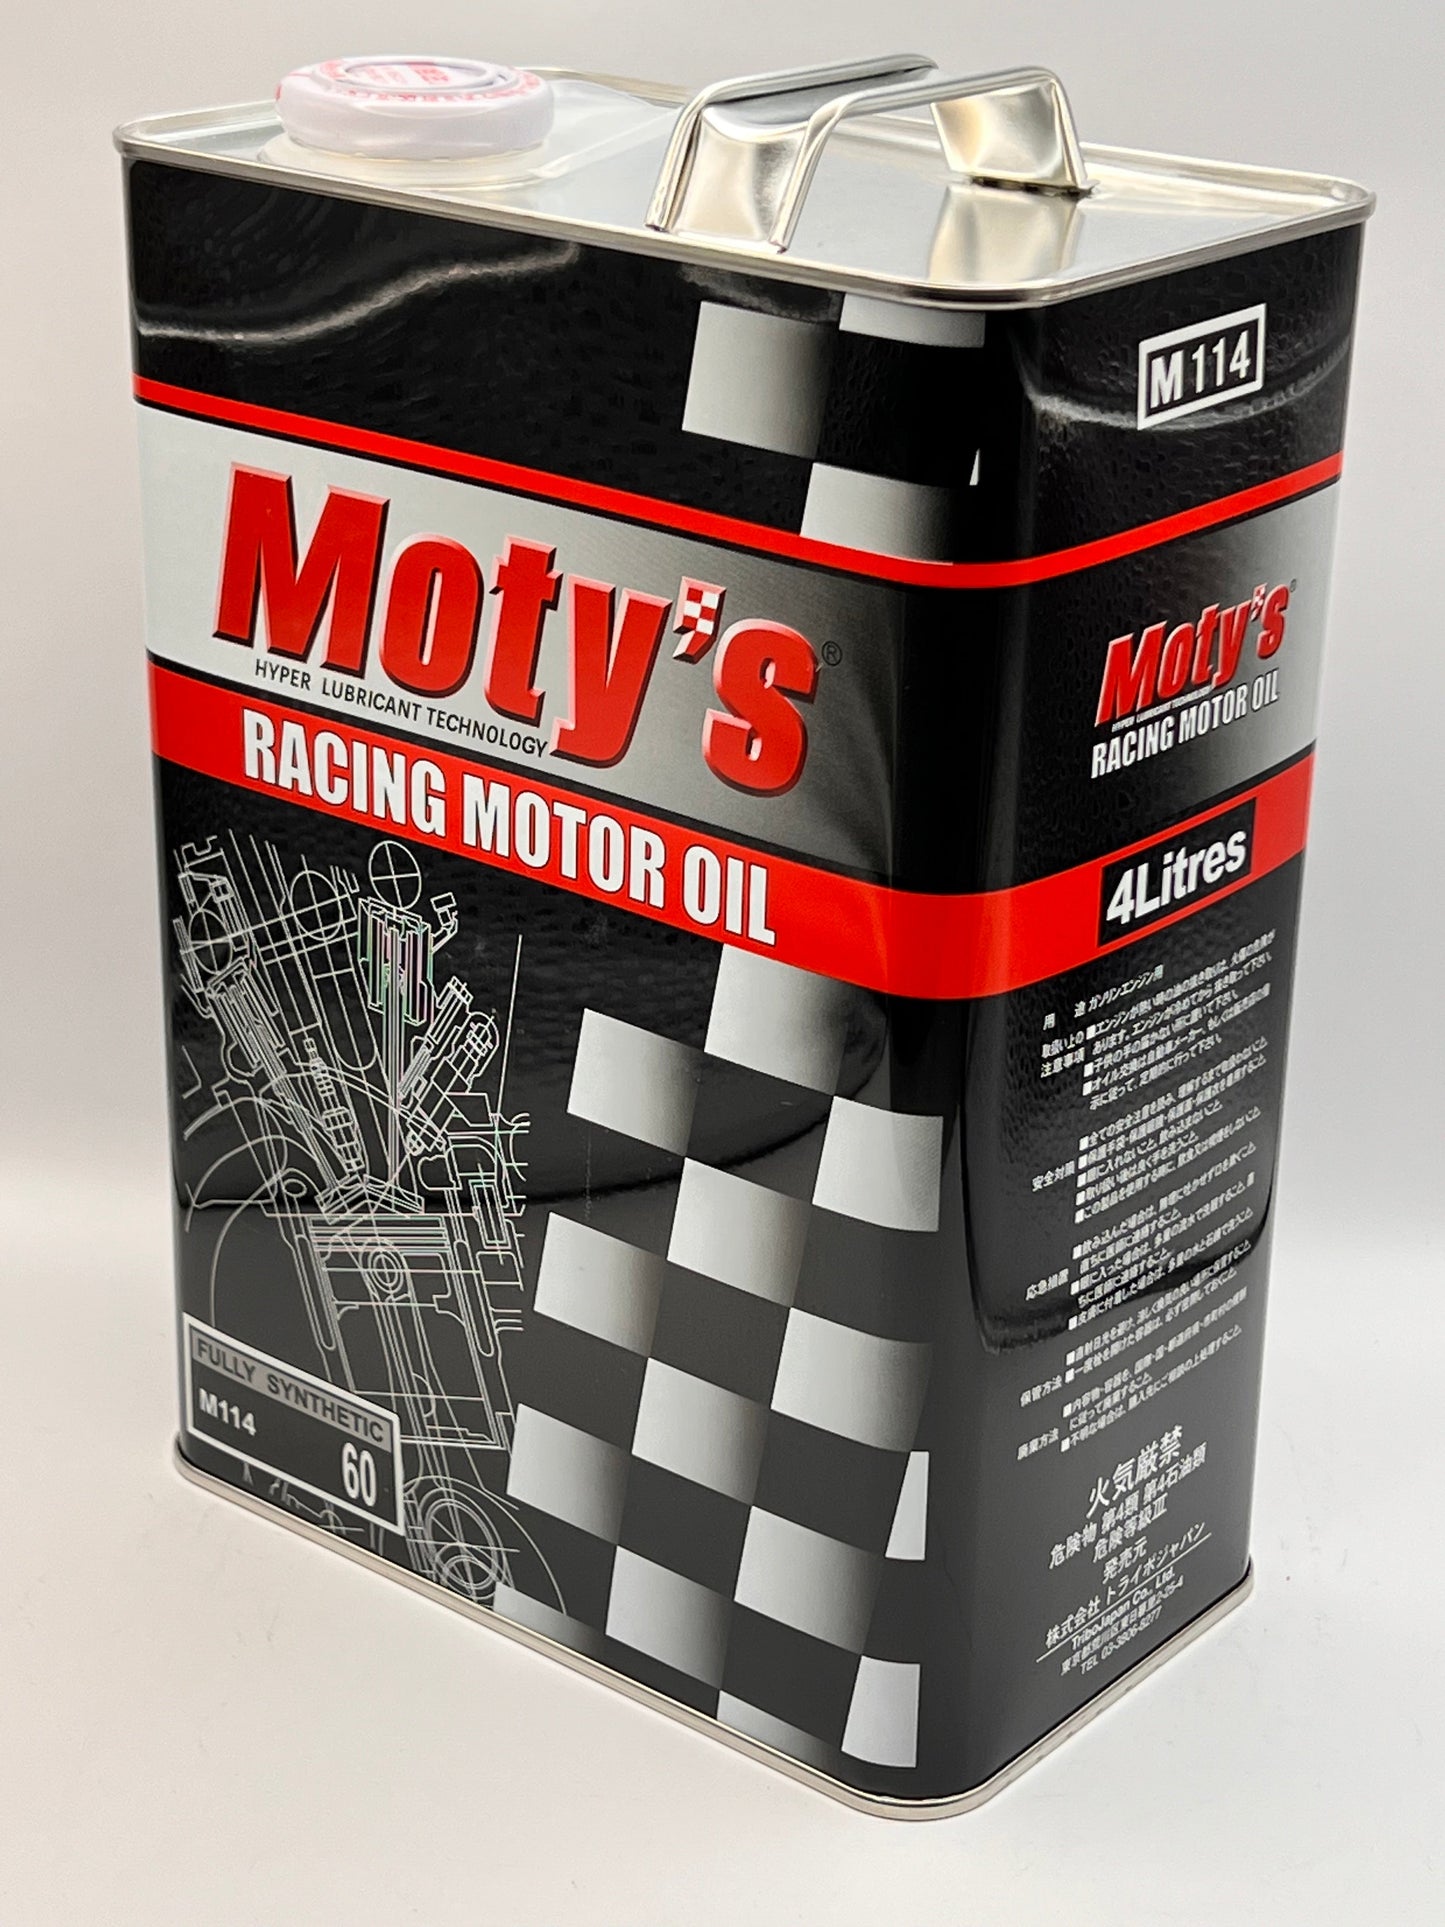 Moty's Racing Motor Oil Fully Synthetic M114(60) 15w60 4 Litre Can